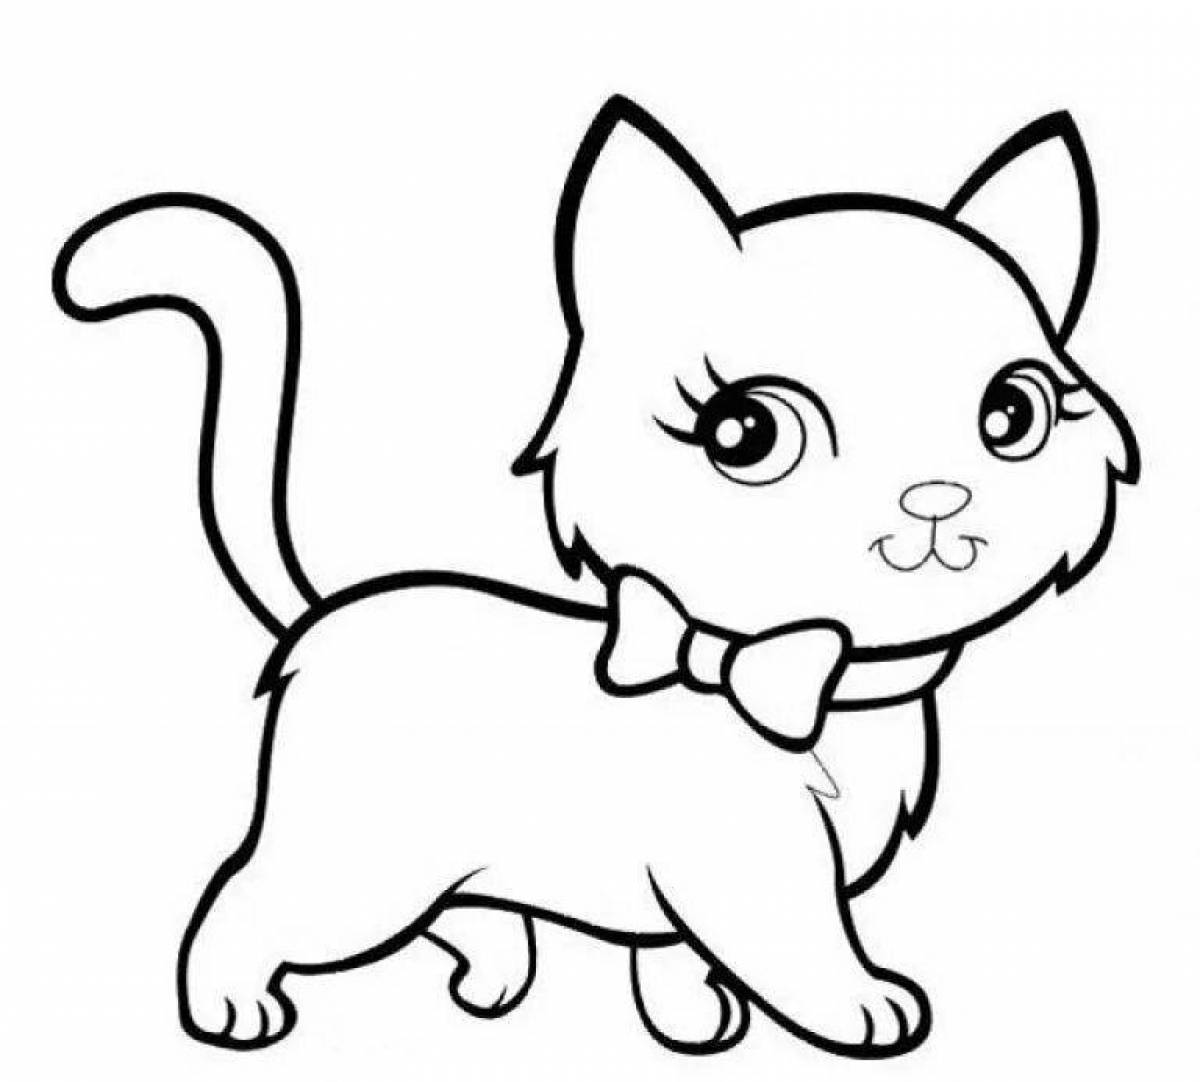 Fat meow coloring page